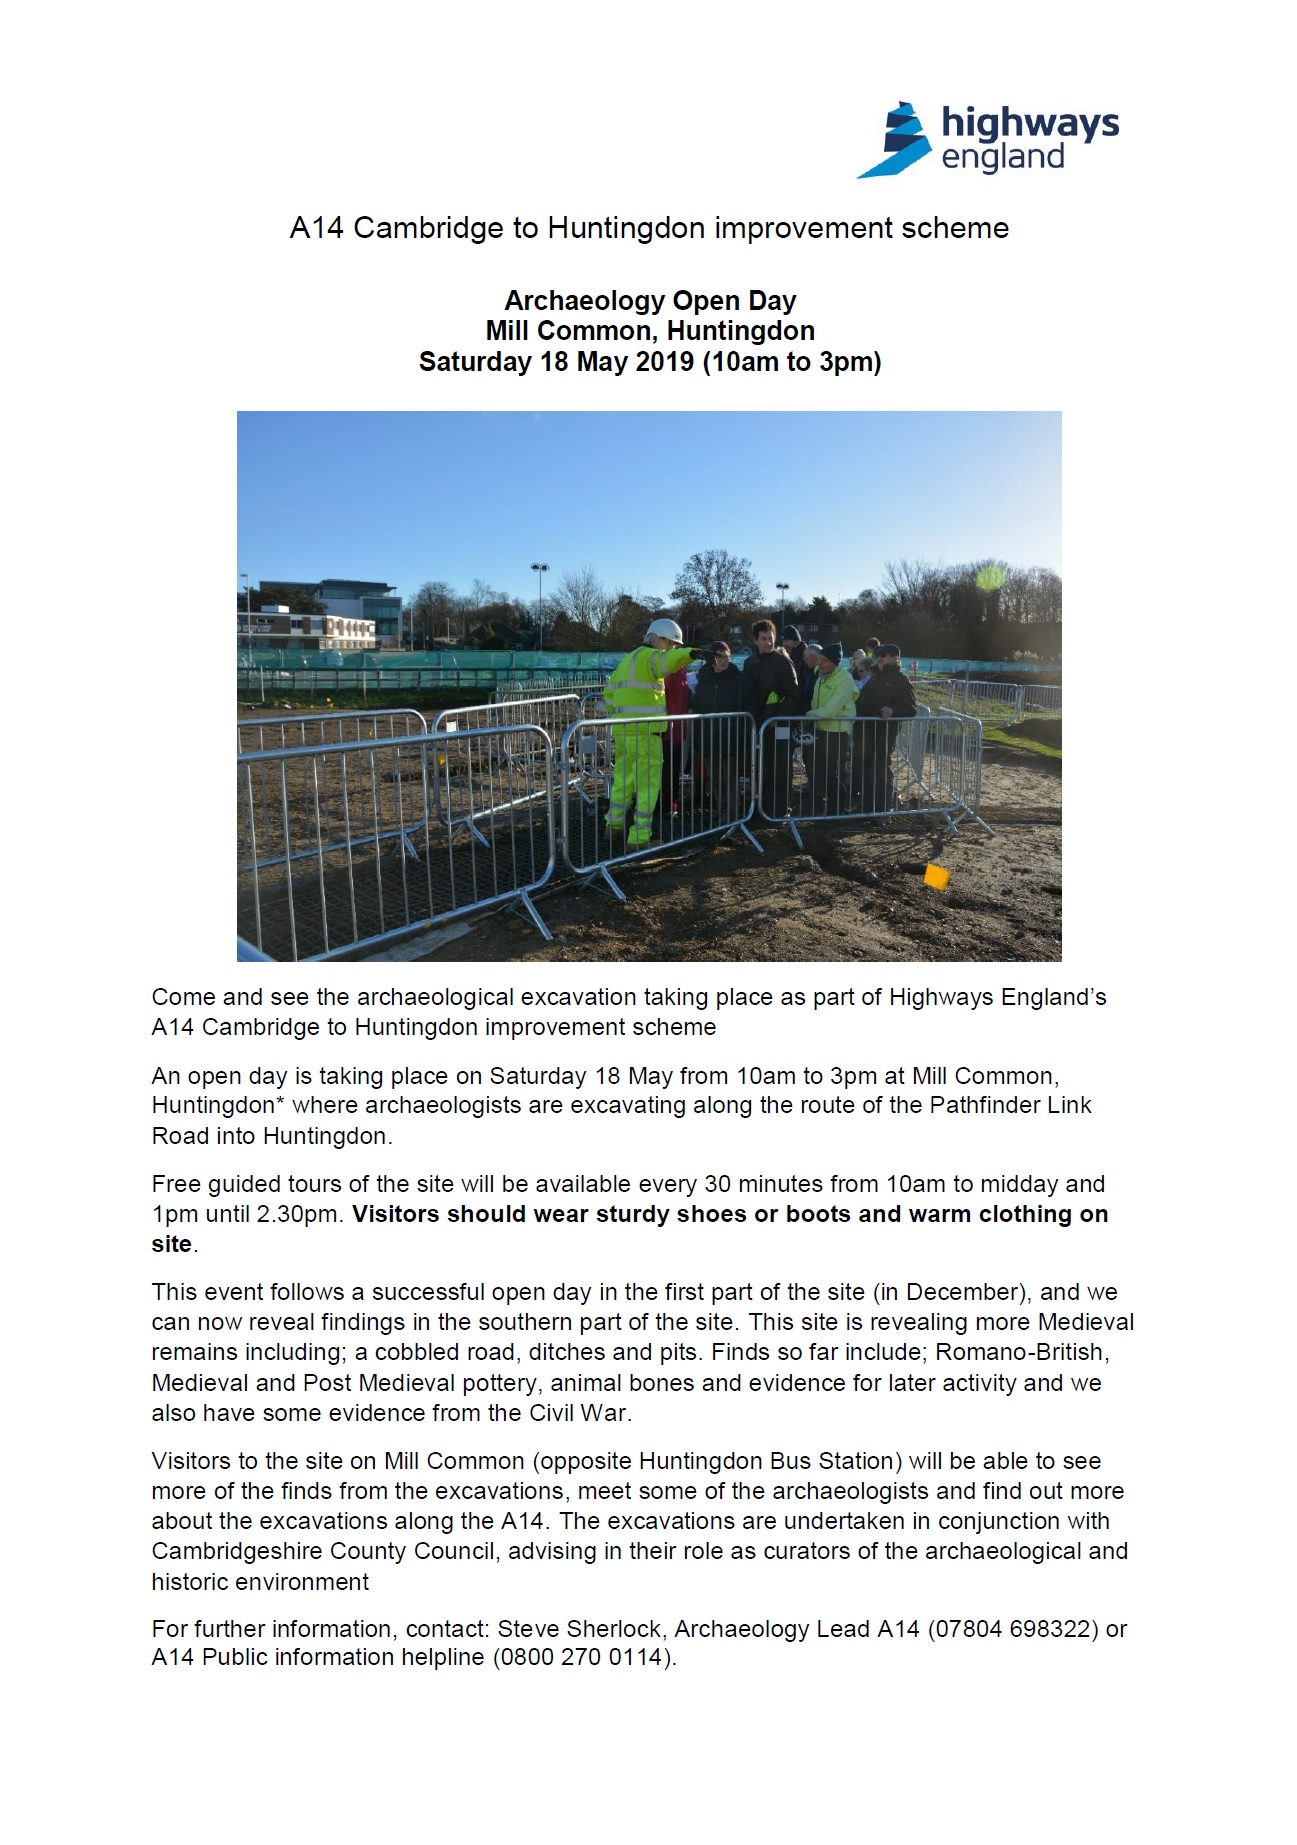 A14 open day may 2019